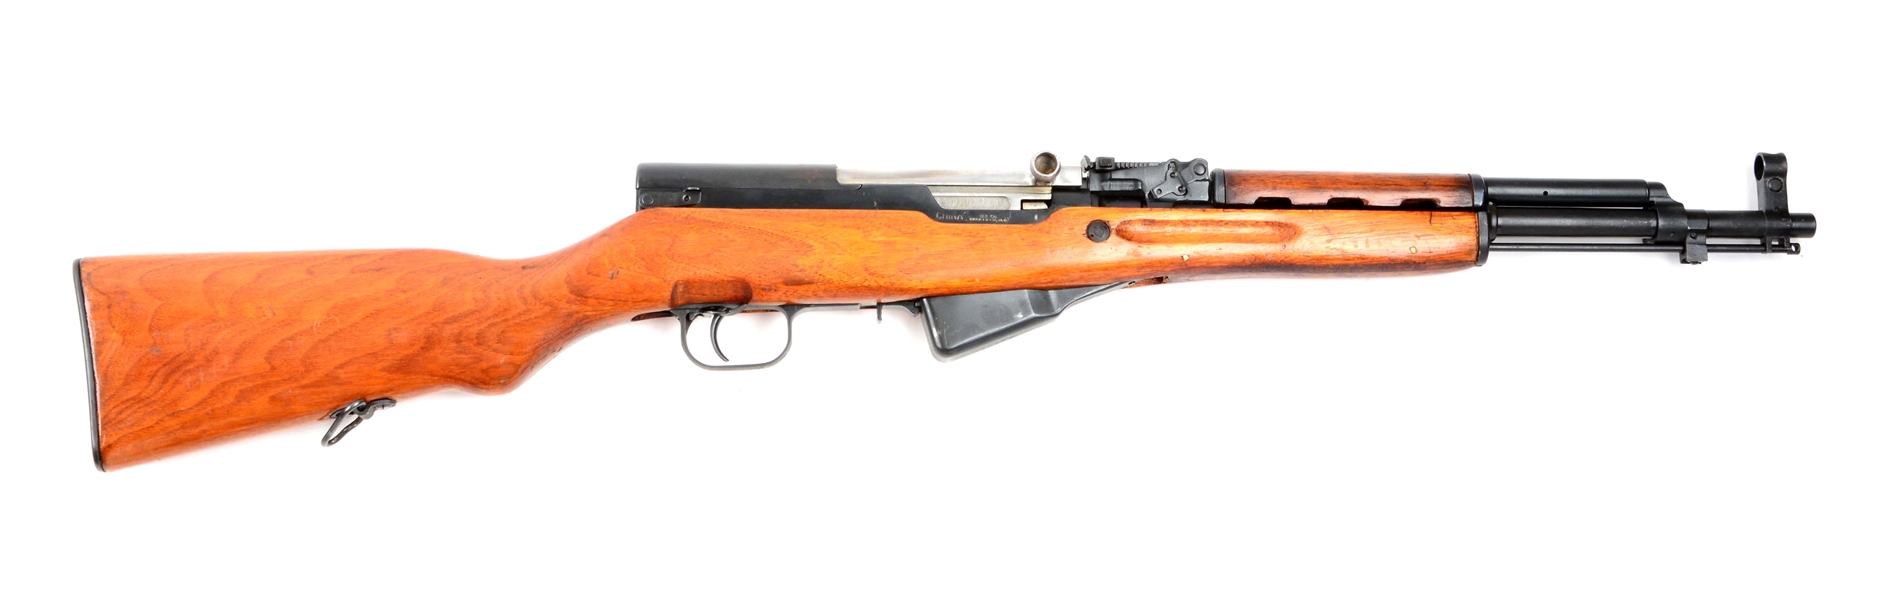 (M) CHINESE SKS SEMI AUTOMATIC CARBINE.